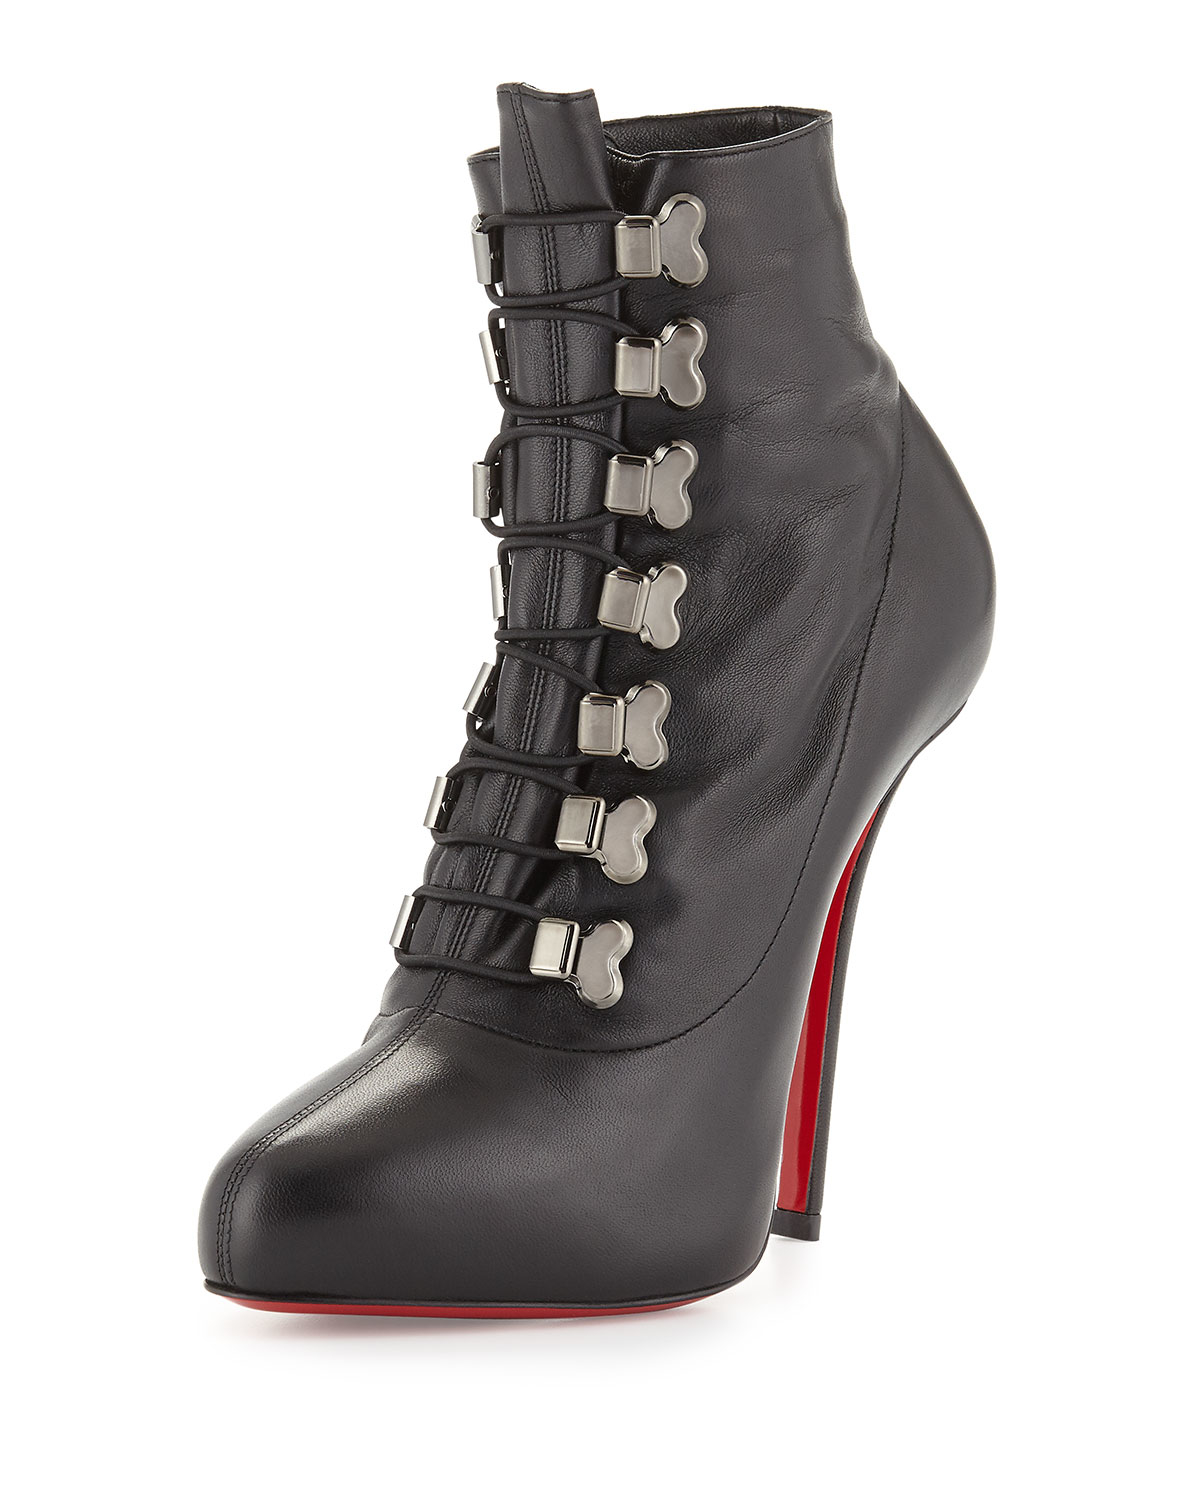 Christian louboutin Troopista Leather Stiletto Boots in Black | Lyst